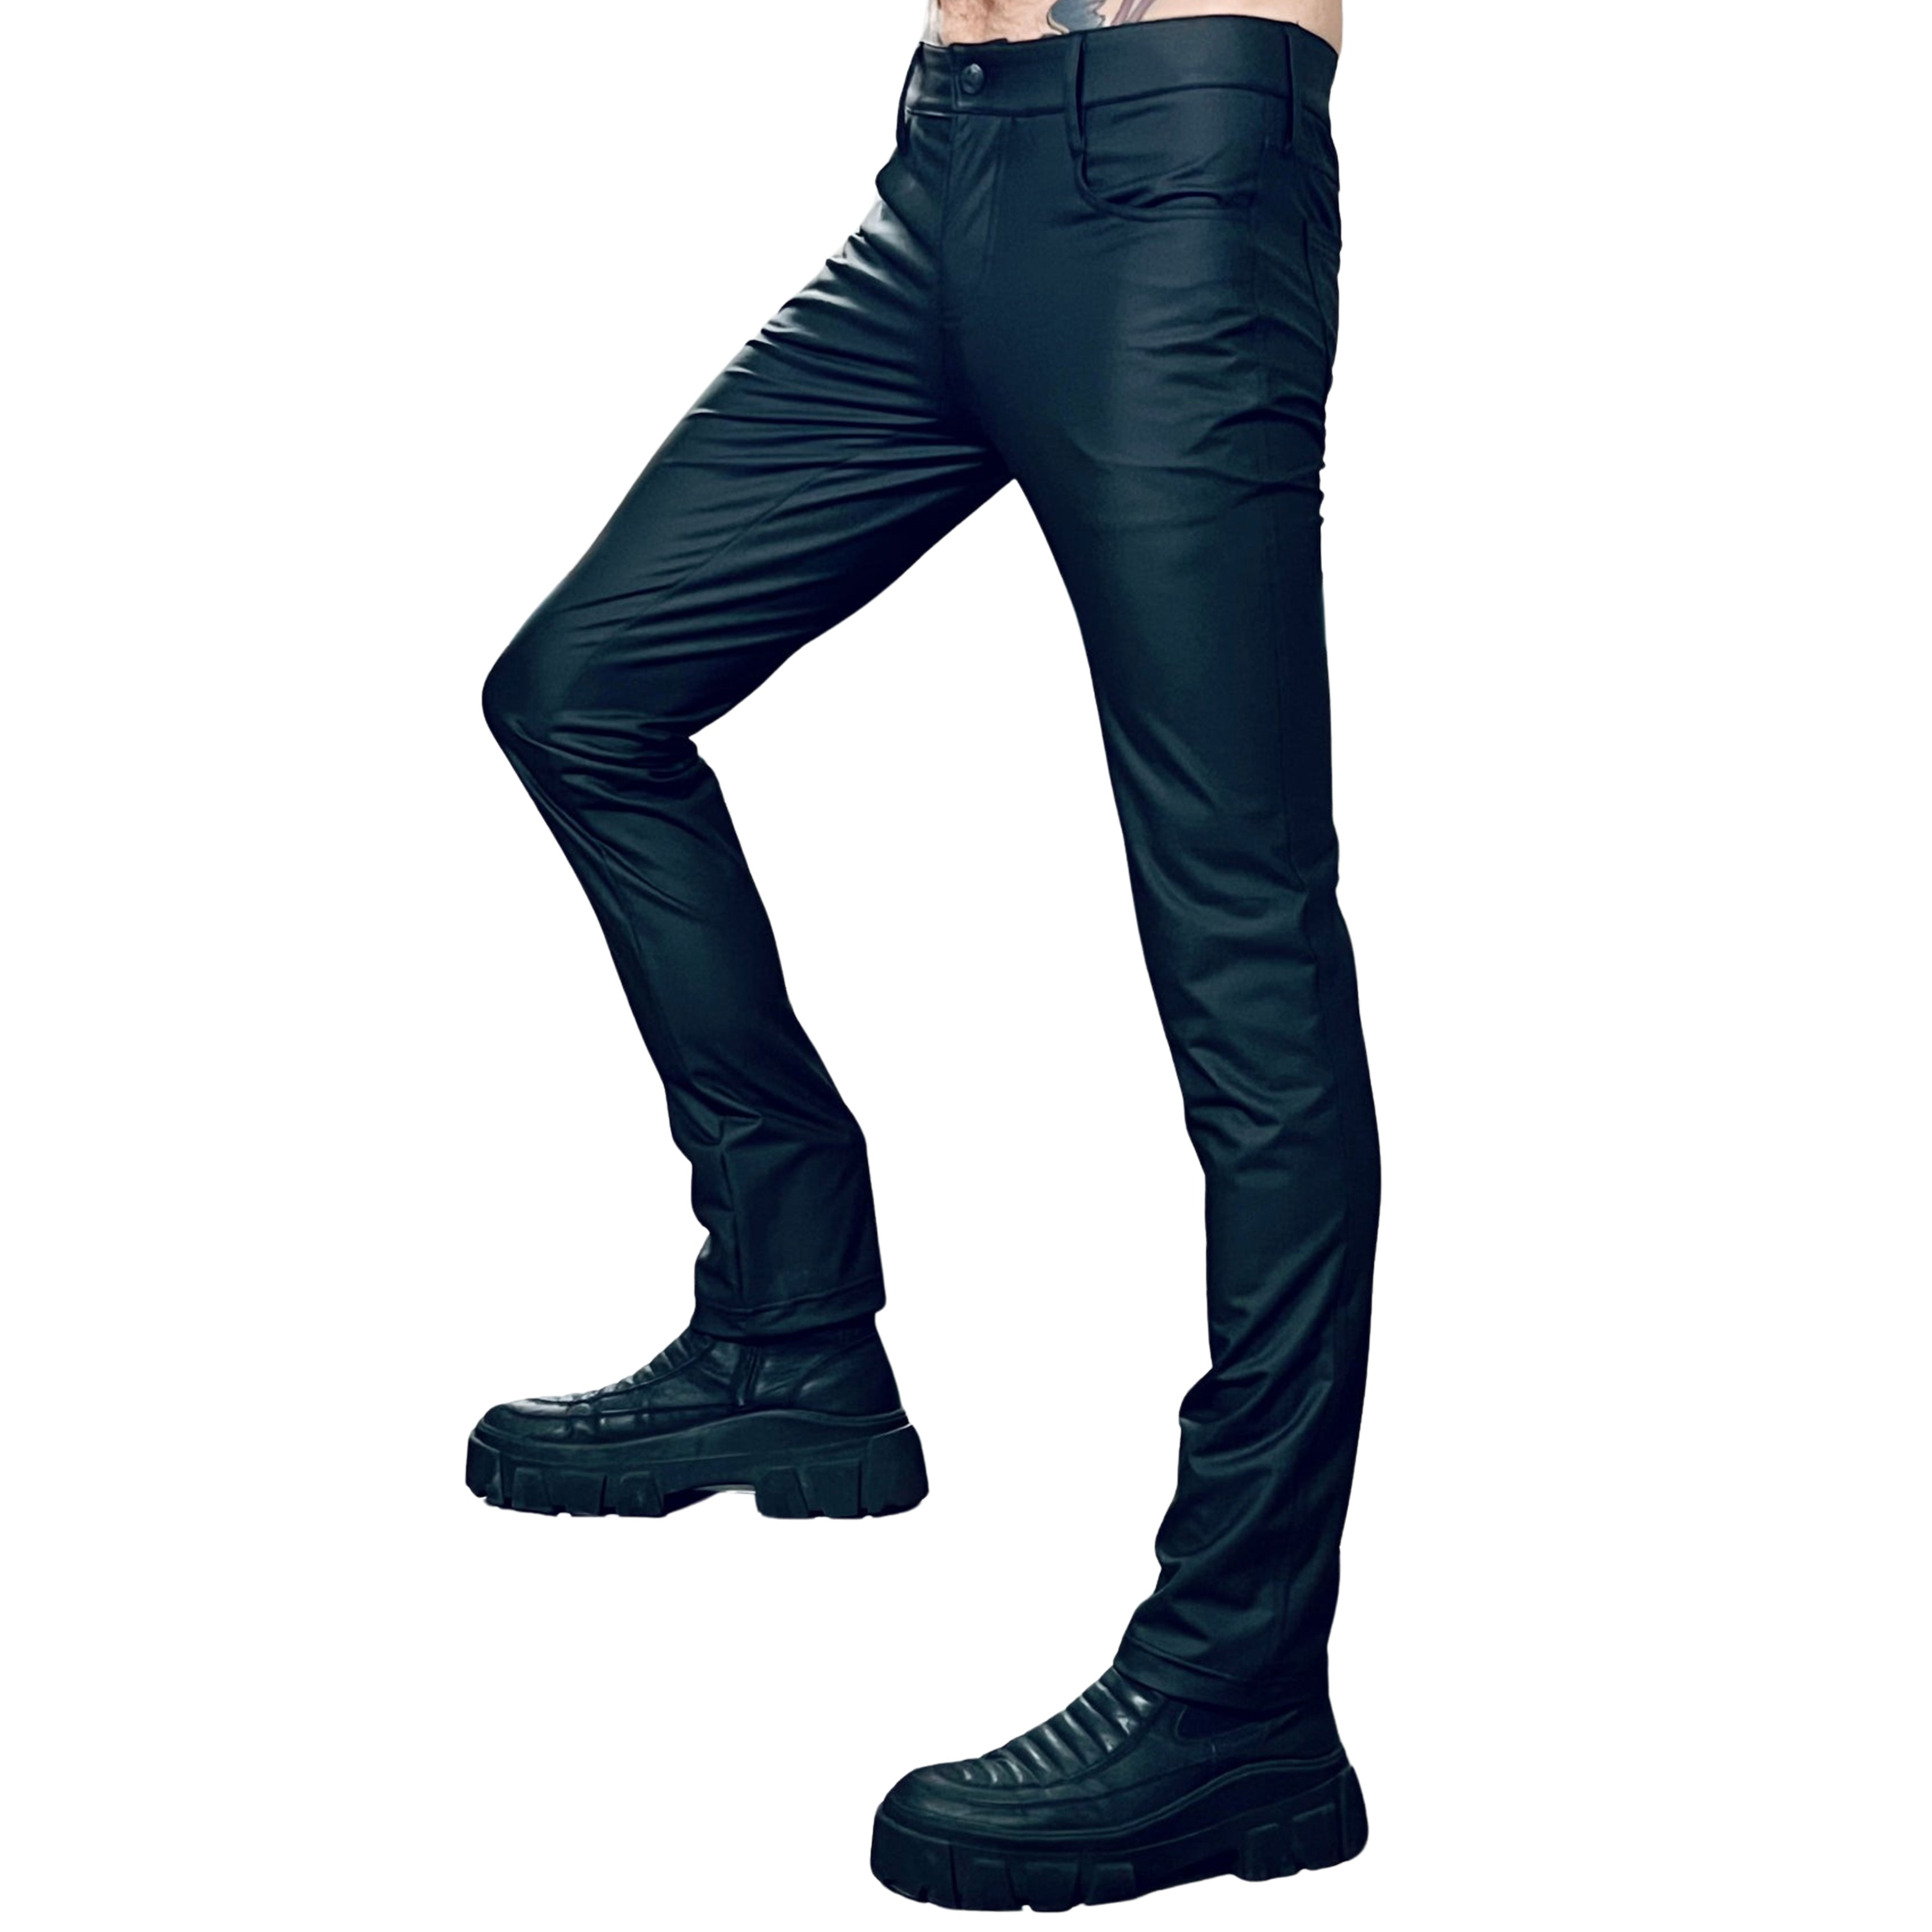 Mens Evil Fitted Button PVCl Jeans Pants